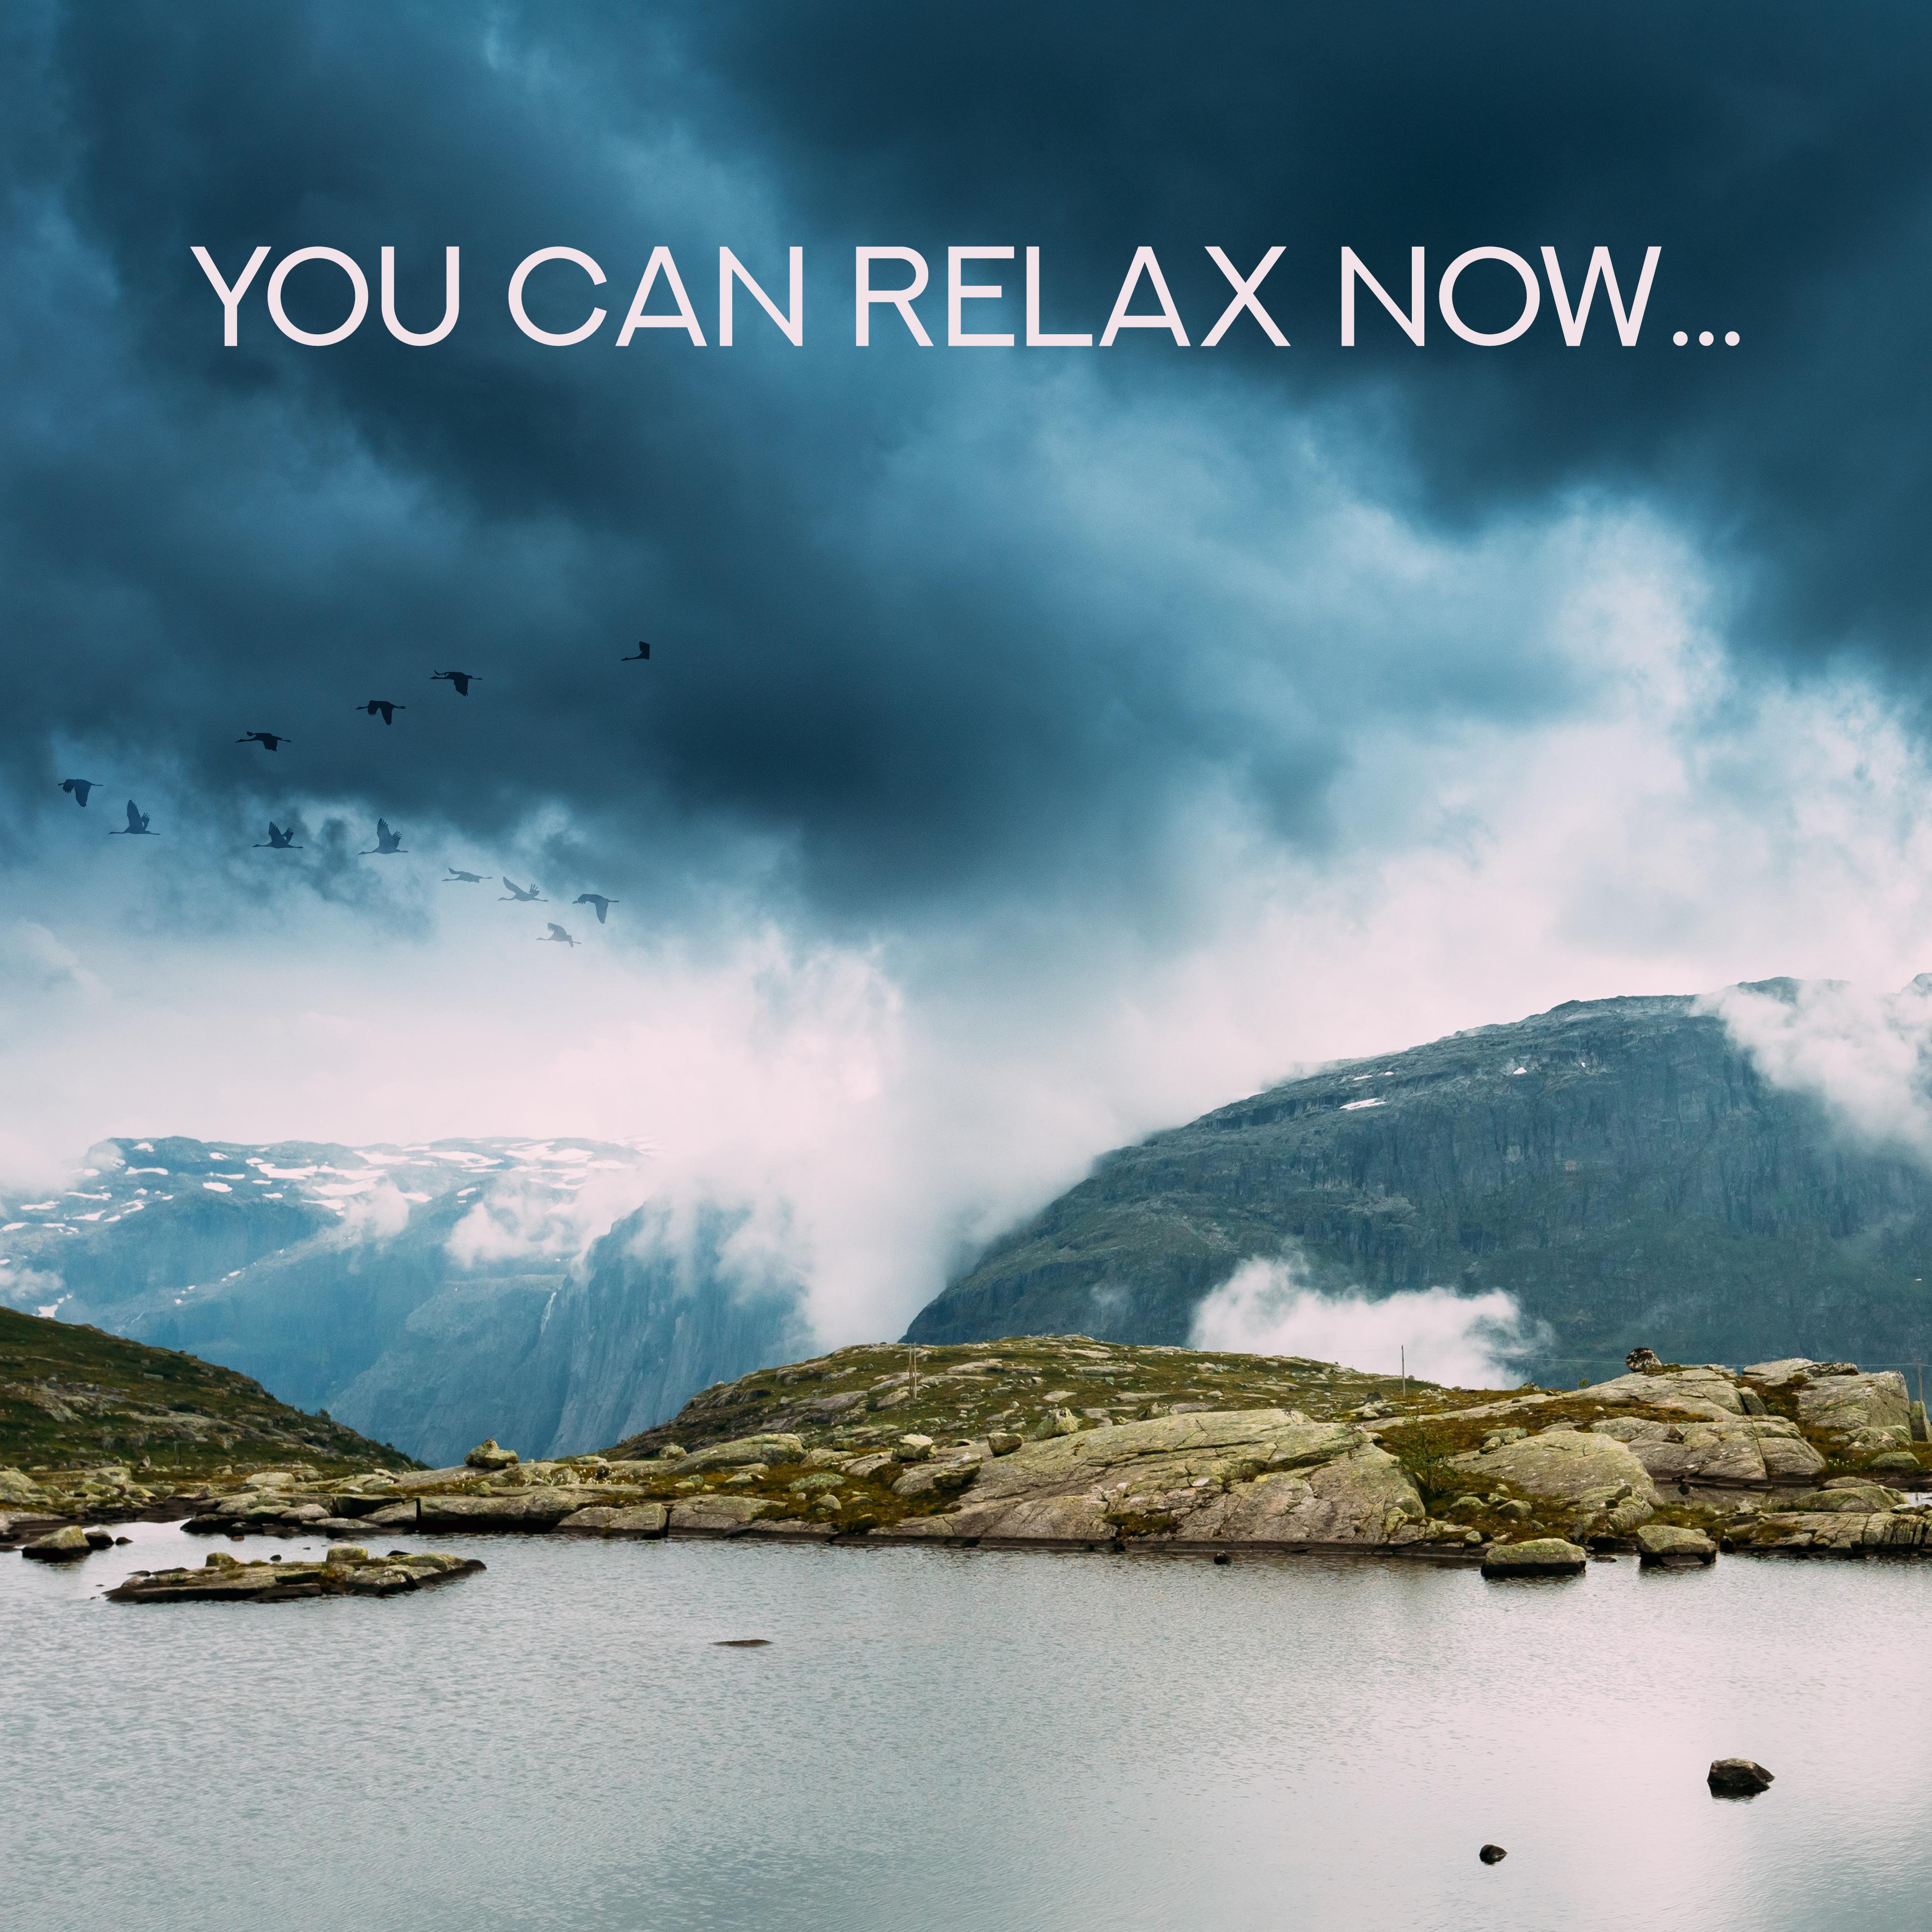 You Can Relax Now… - 2019 Piano & Nature New Age Soft Music for Total Relaxation, Calm Down, Stress Relief Songs, Soothing Sounds of Birds, Water, Forest